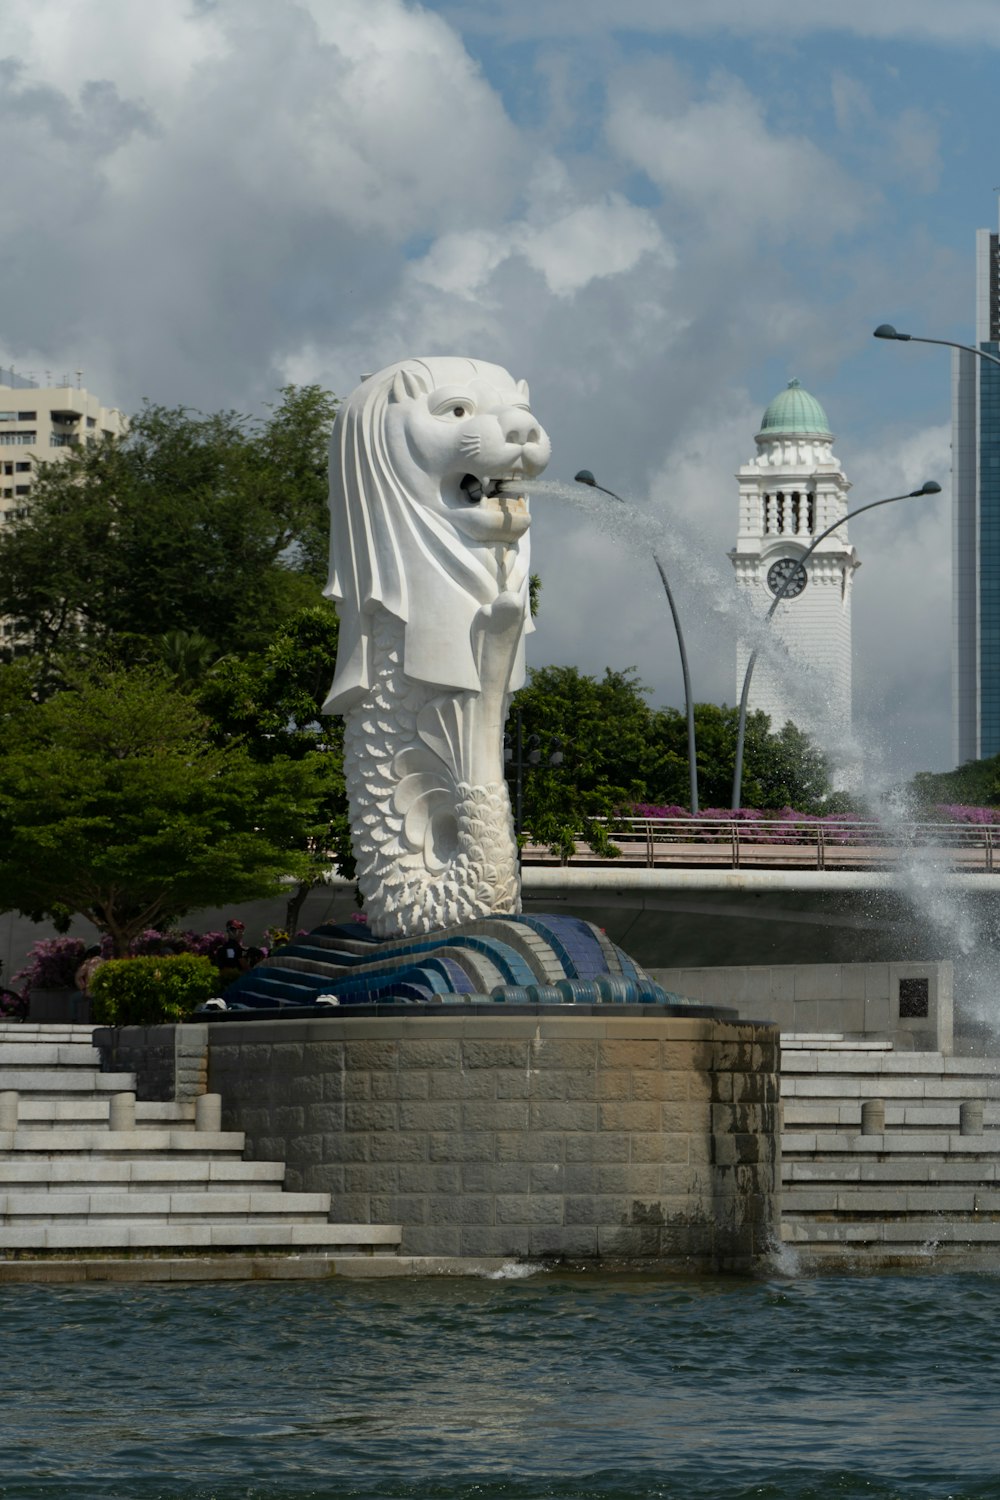 a large statue of a lion near a body of water